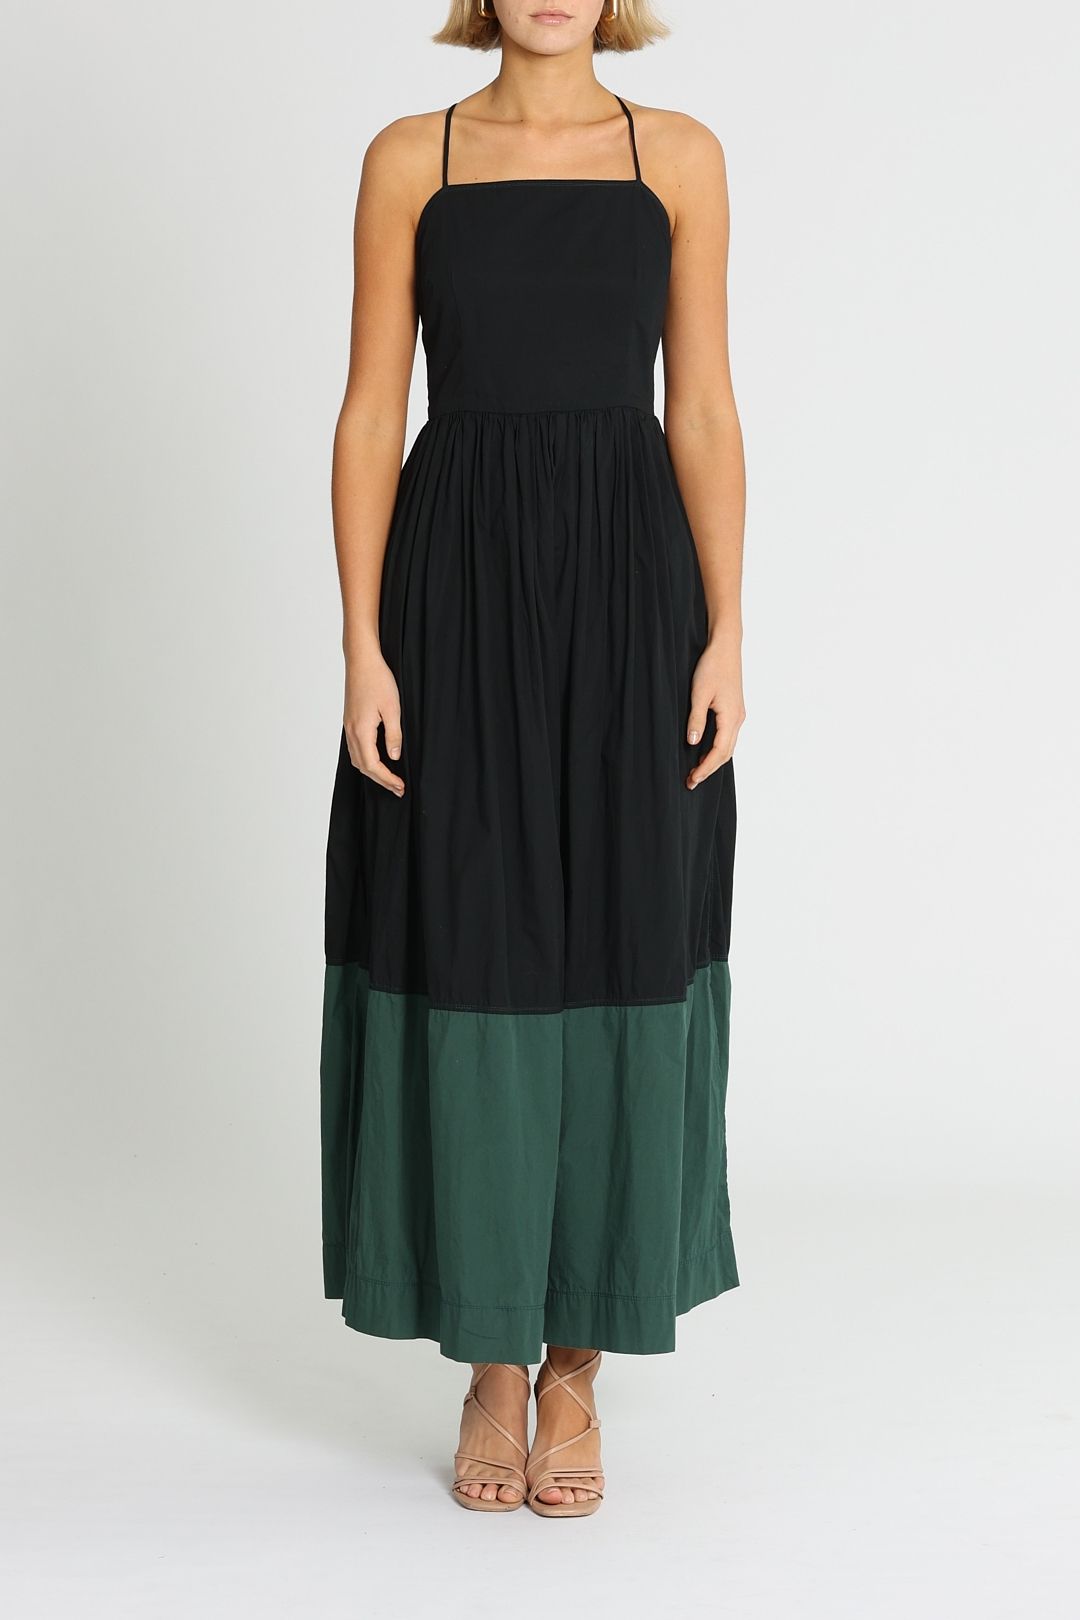 Bassike Knotted Maxi Dress Colour Block